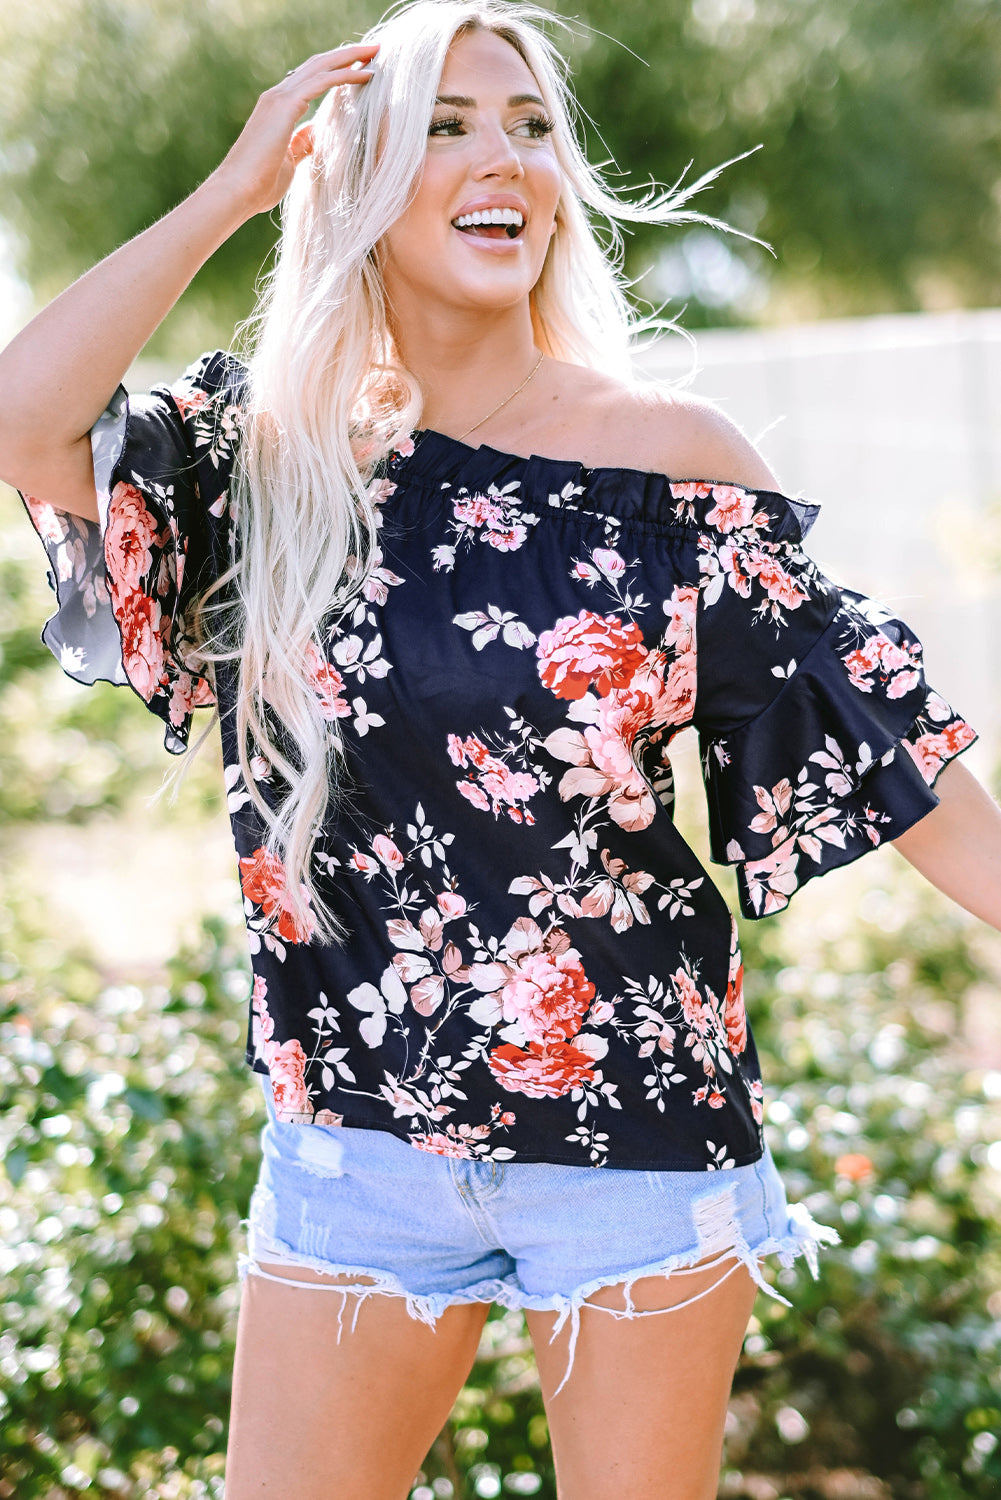 Chic Blue Floral Off Shoulder Blouse with Ruffled Sleeves